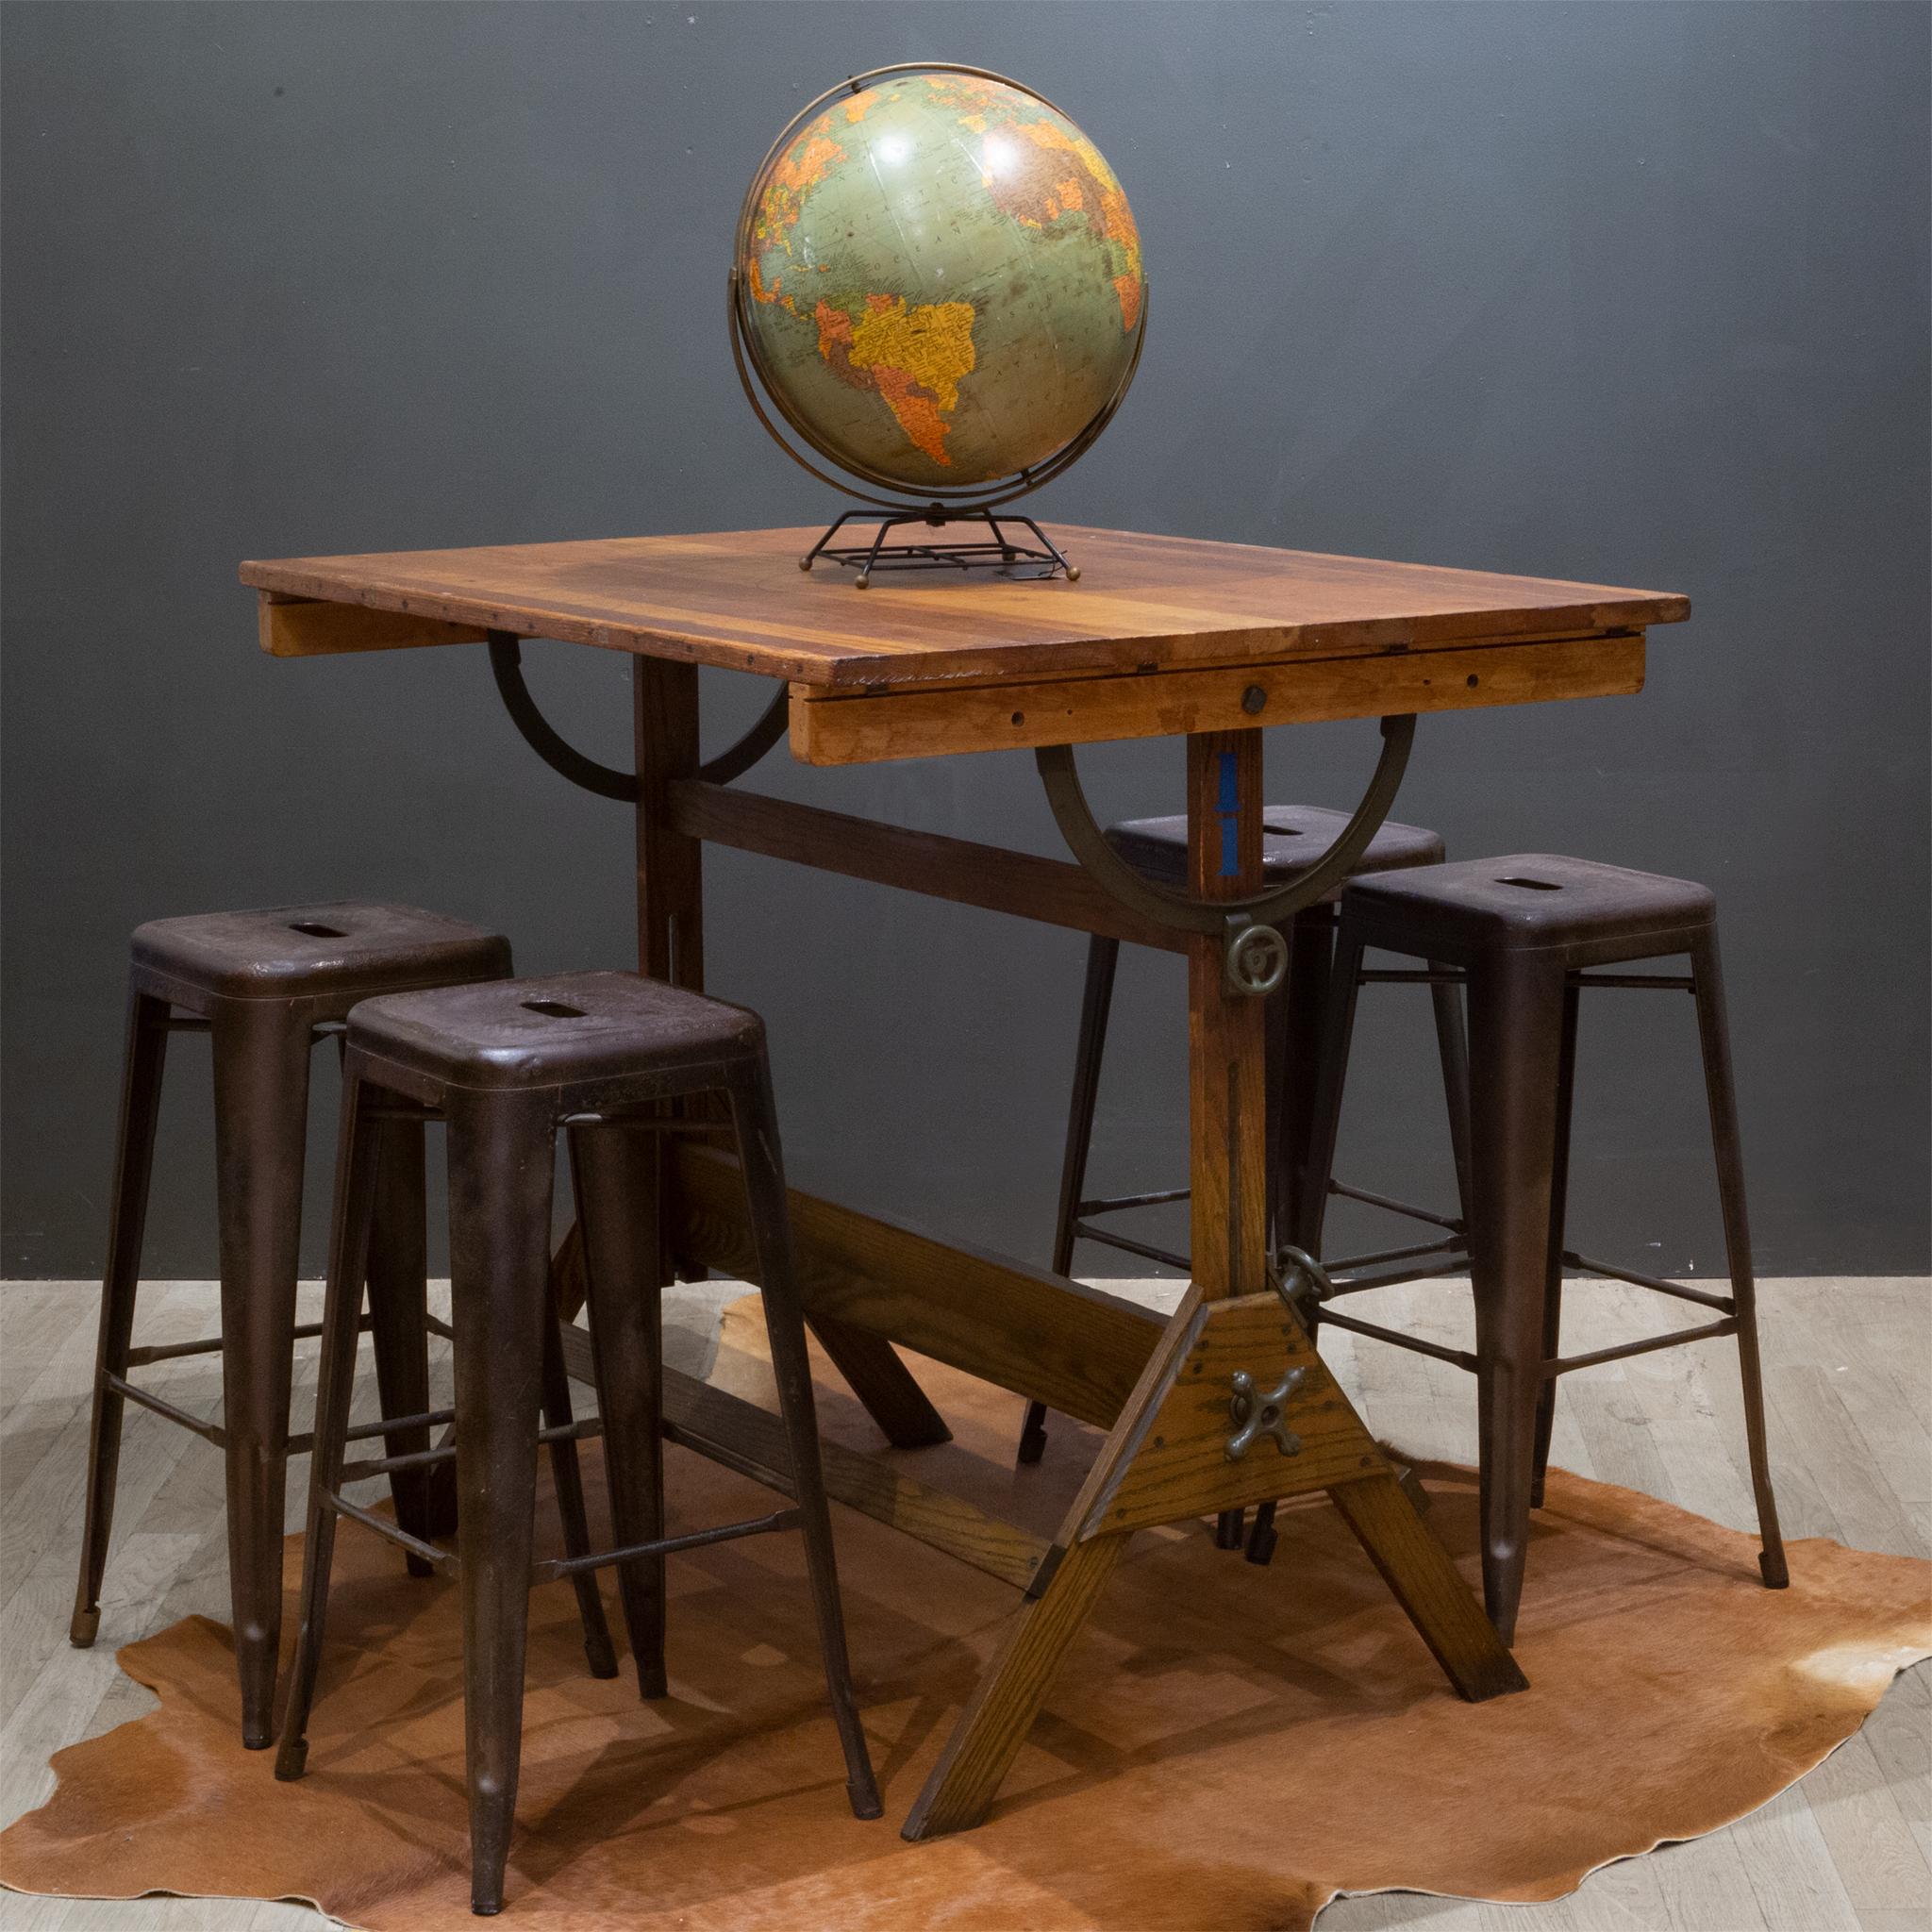 About

A fully adjustable industrial wooden drafting table with Army green steel and cast iron knobs and brackets. The table can be used as a tall dining table, standing desk or drafting table. The top swivels at any angle and from either side.